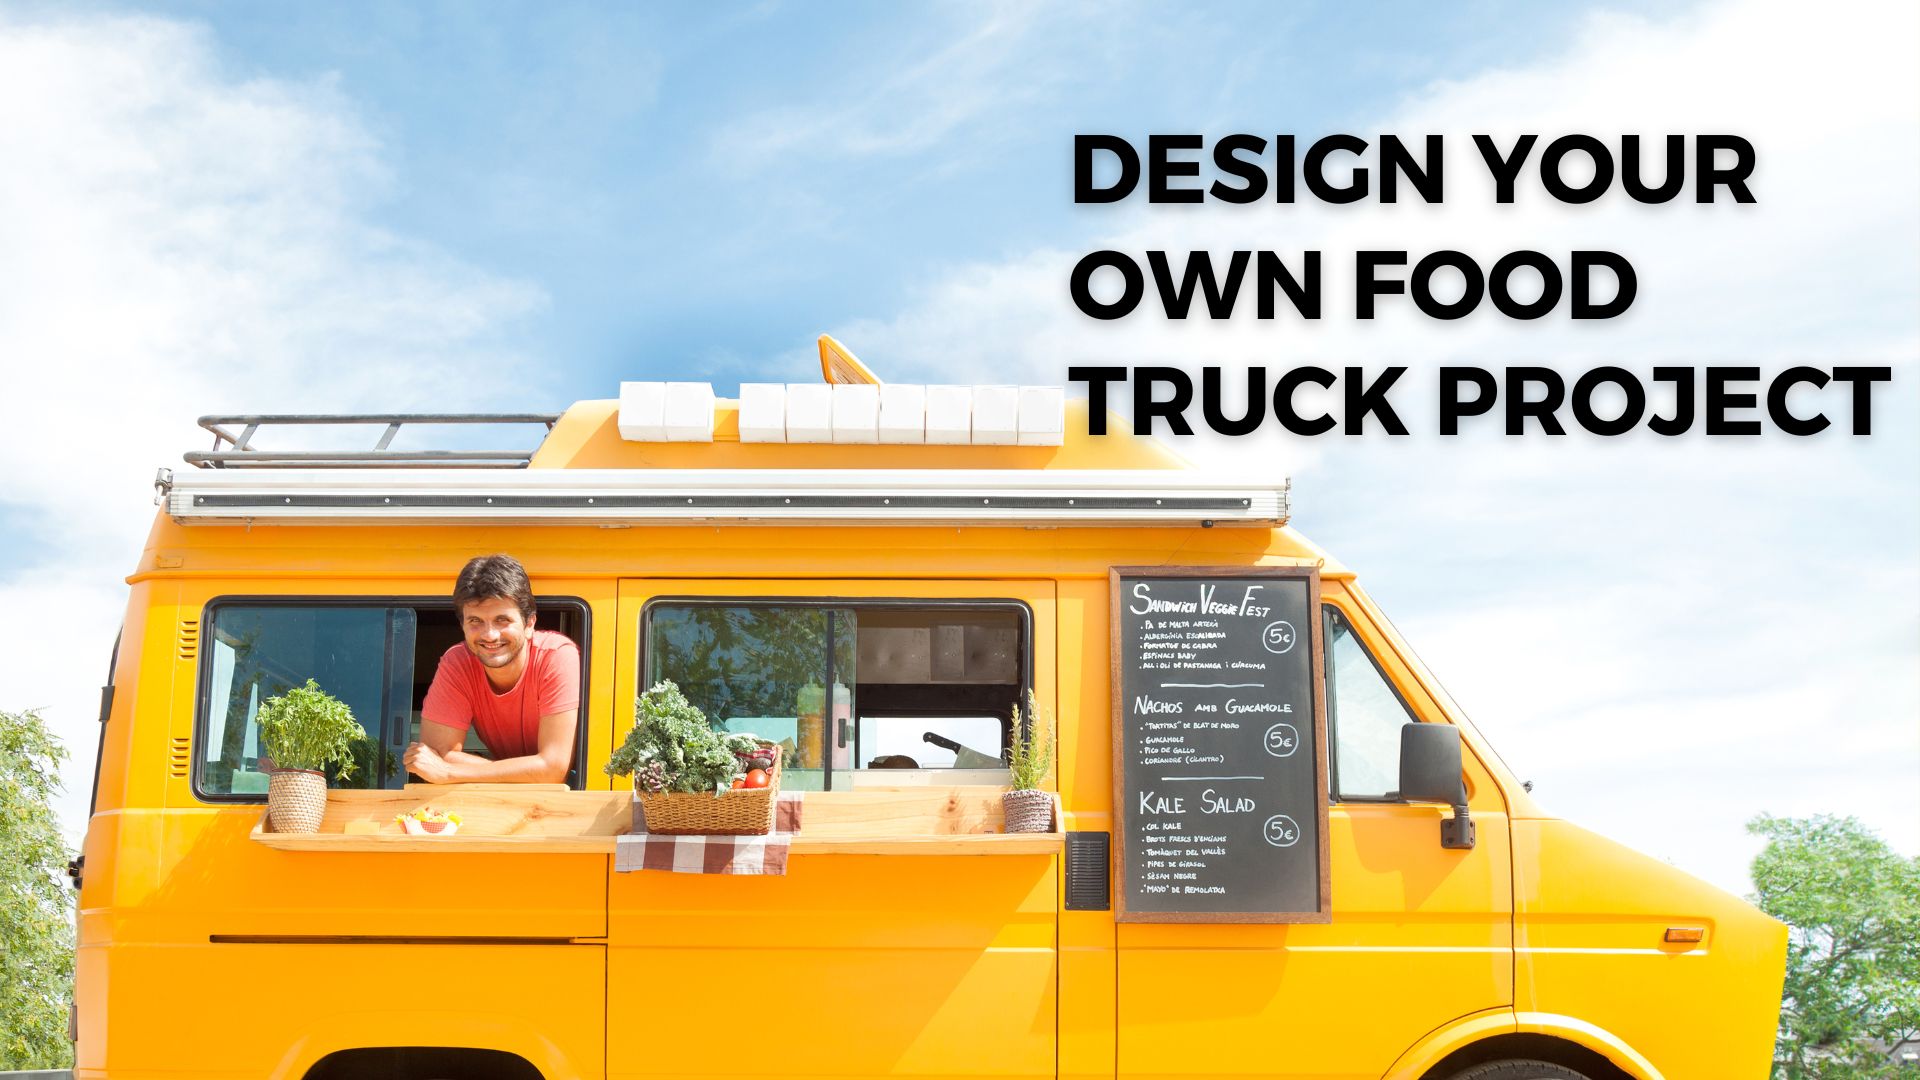 Design Your Own Food Truck Project